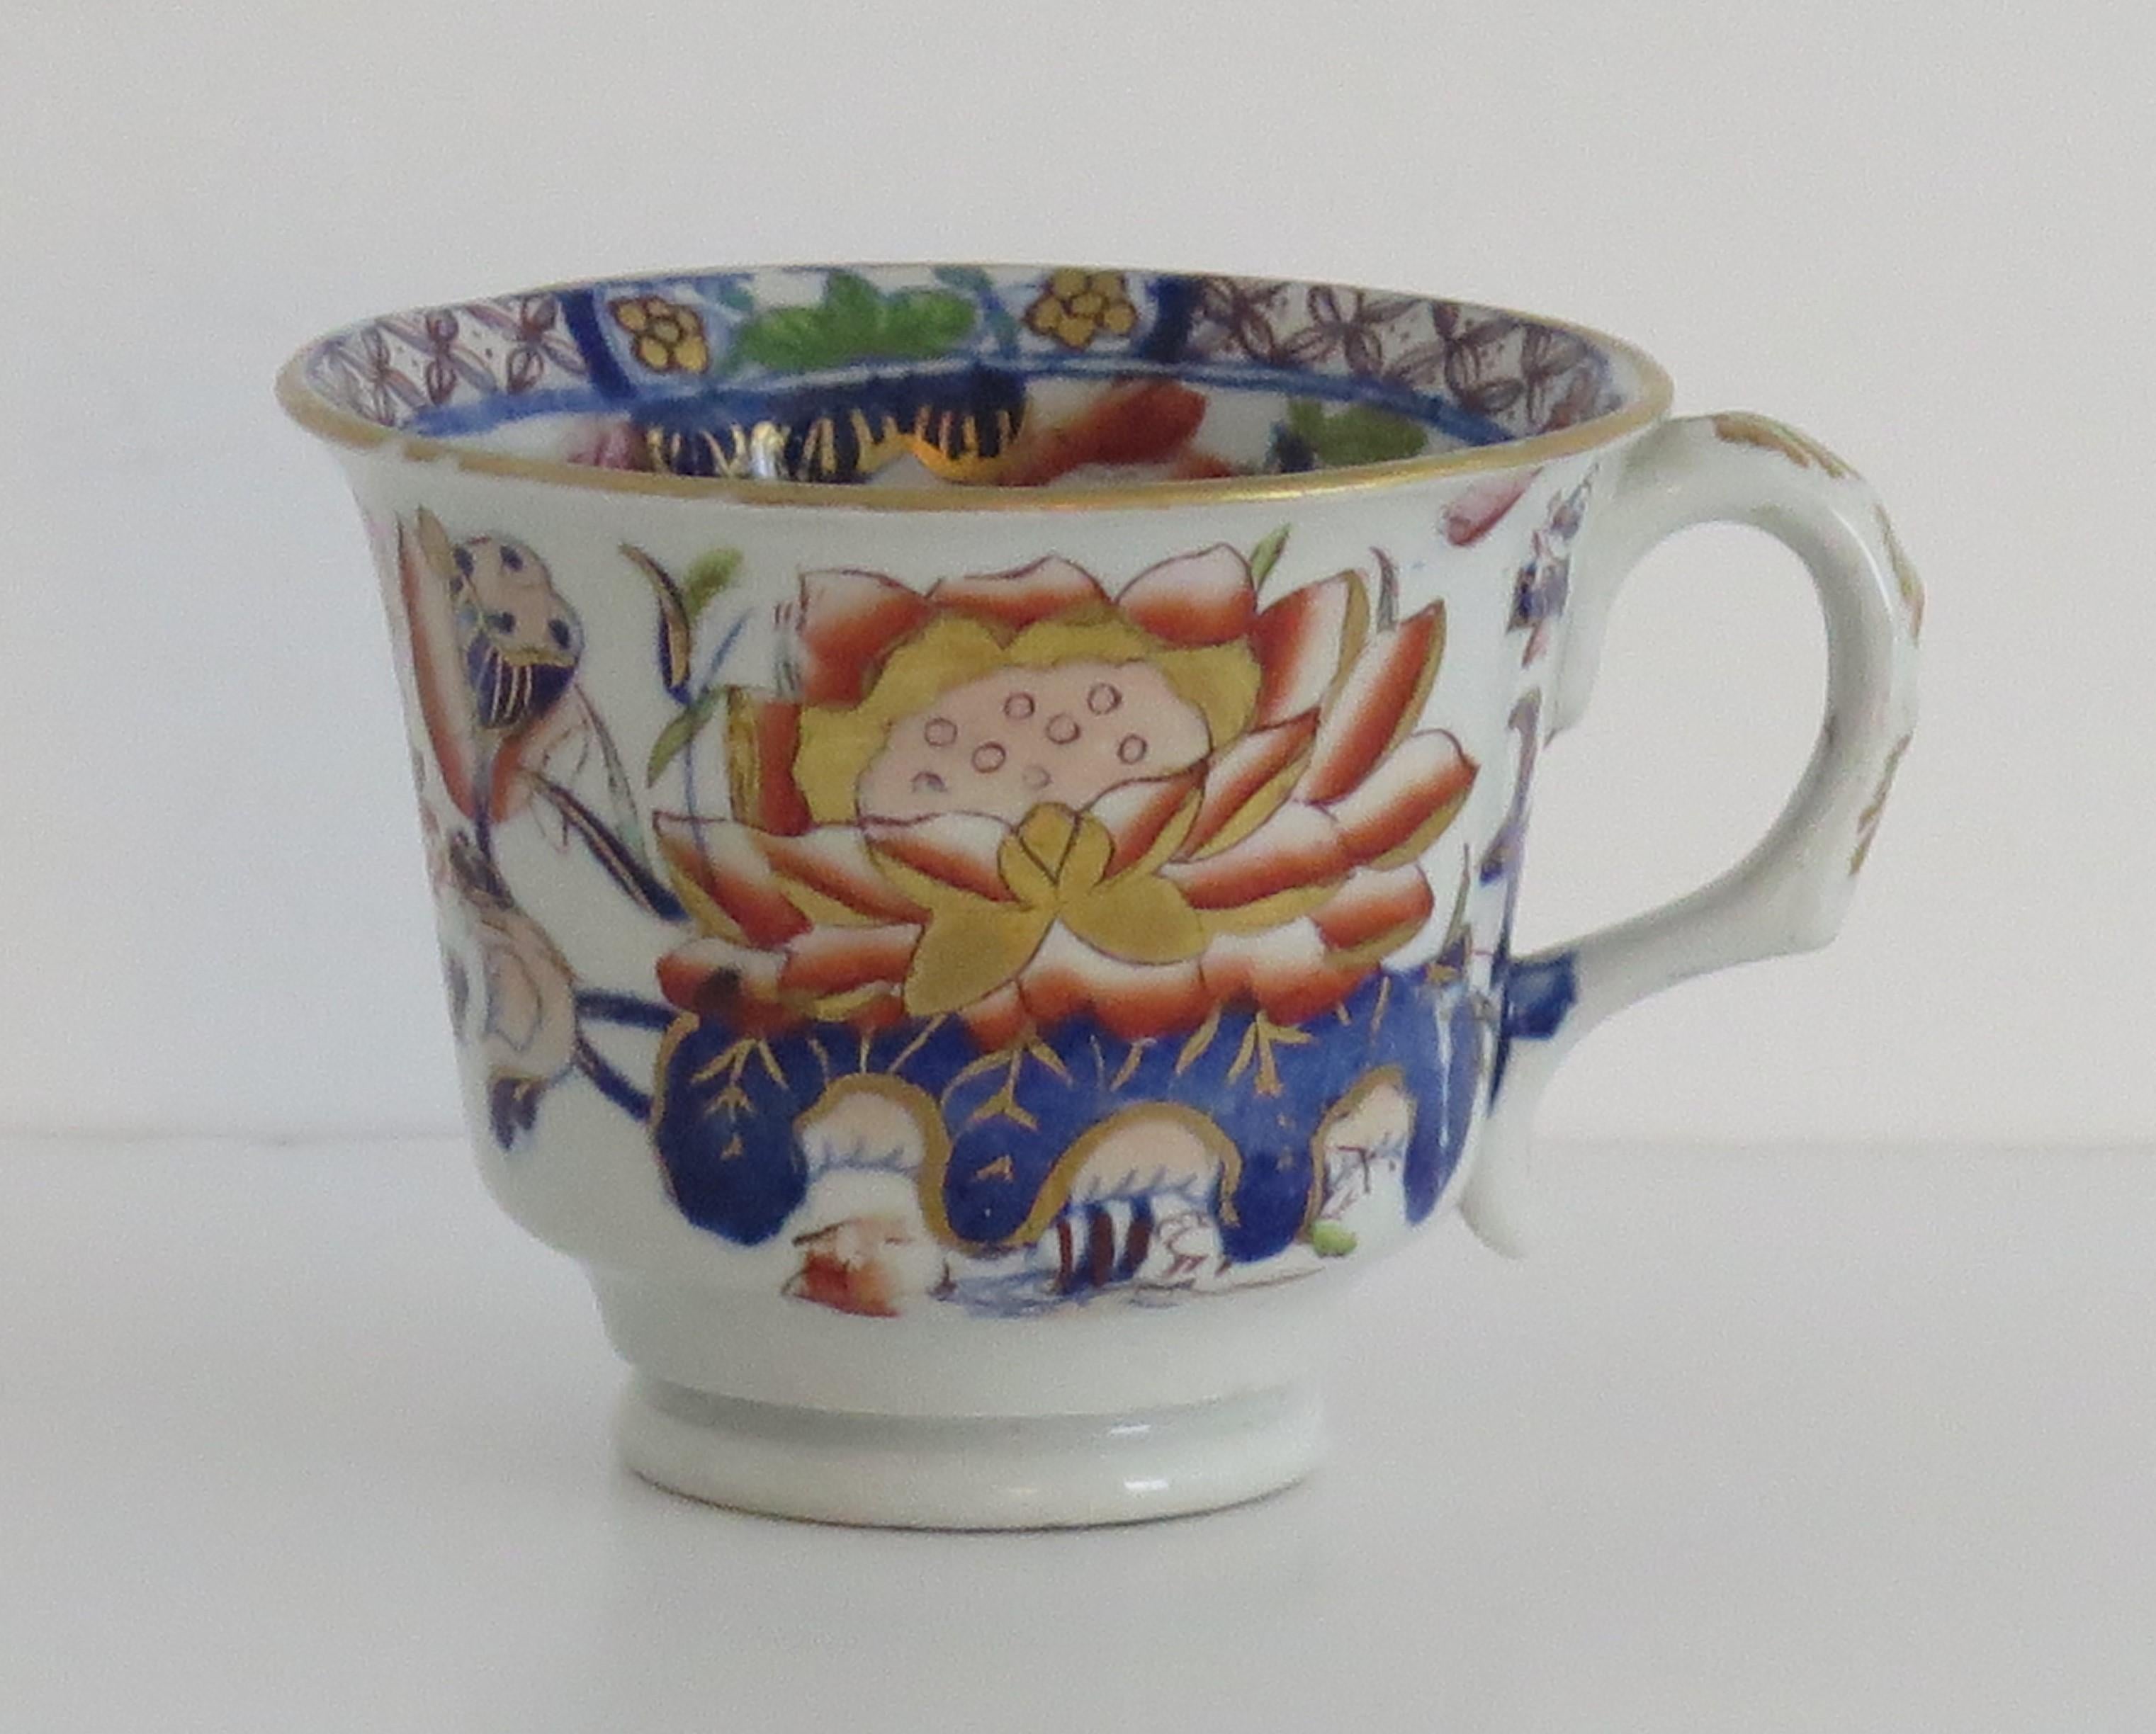 This is a beautiful, early Tea Cup in the highly collected Water Lily pattern, made by Mason's Ironstone, England, circa 1835.

This cup has one of the highly decorative and sought after oriental, chinoiserie patterns called 